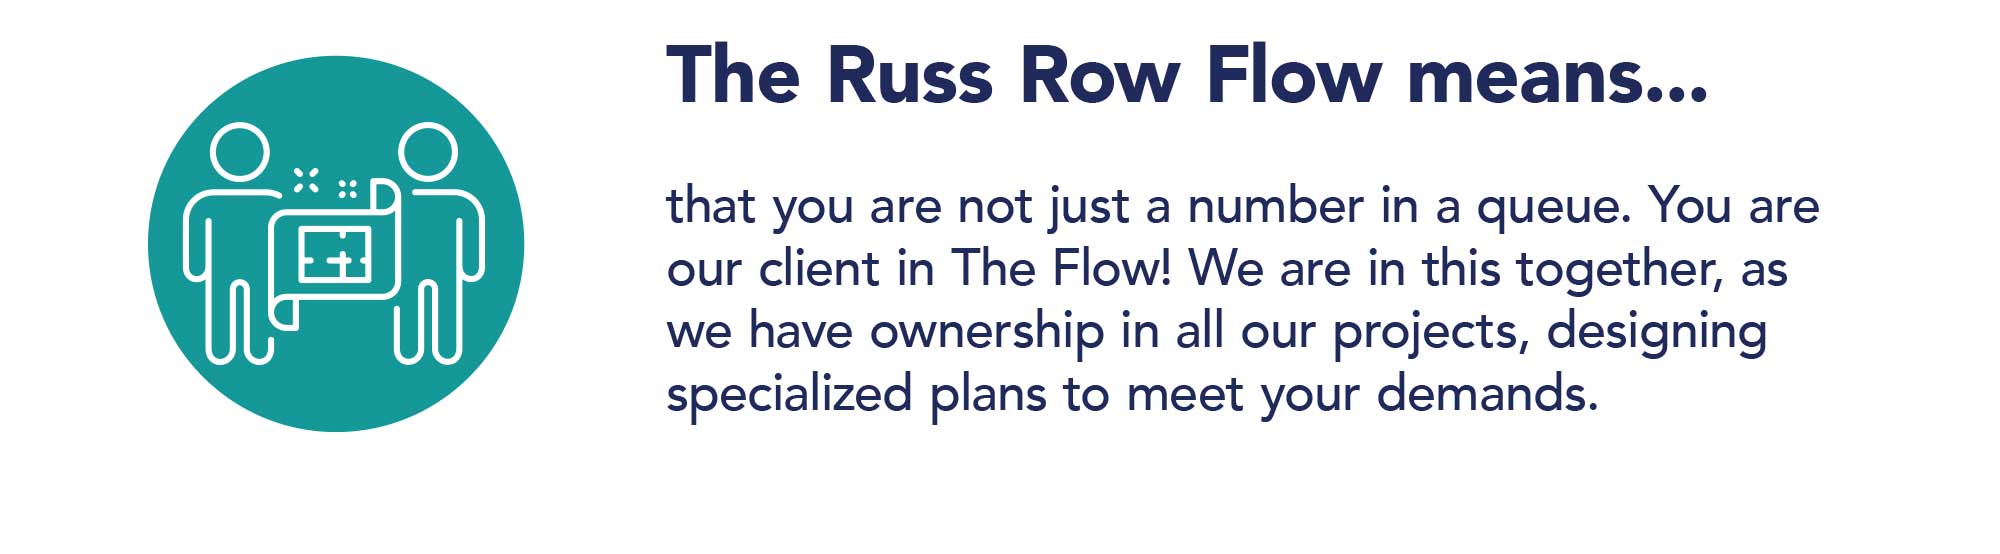 The Russ Row Flow means that you are not just a number.